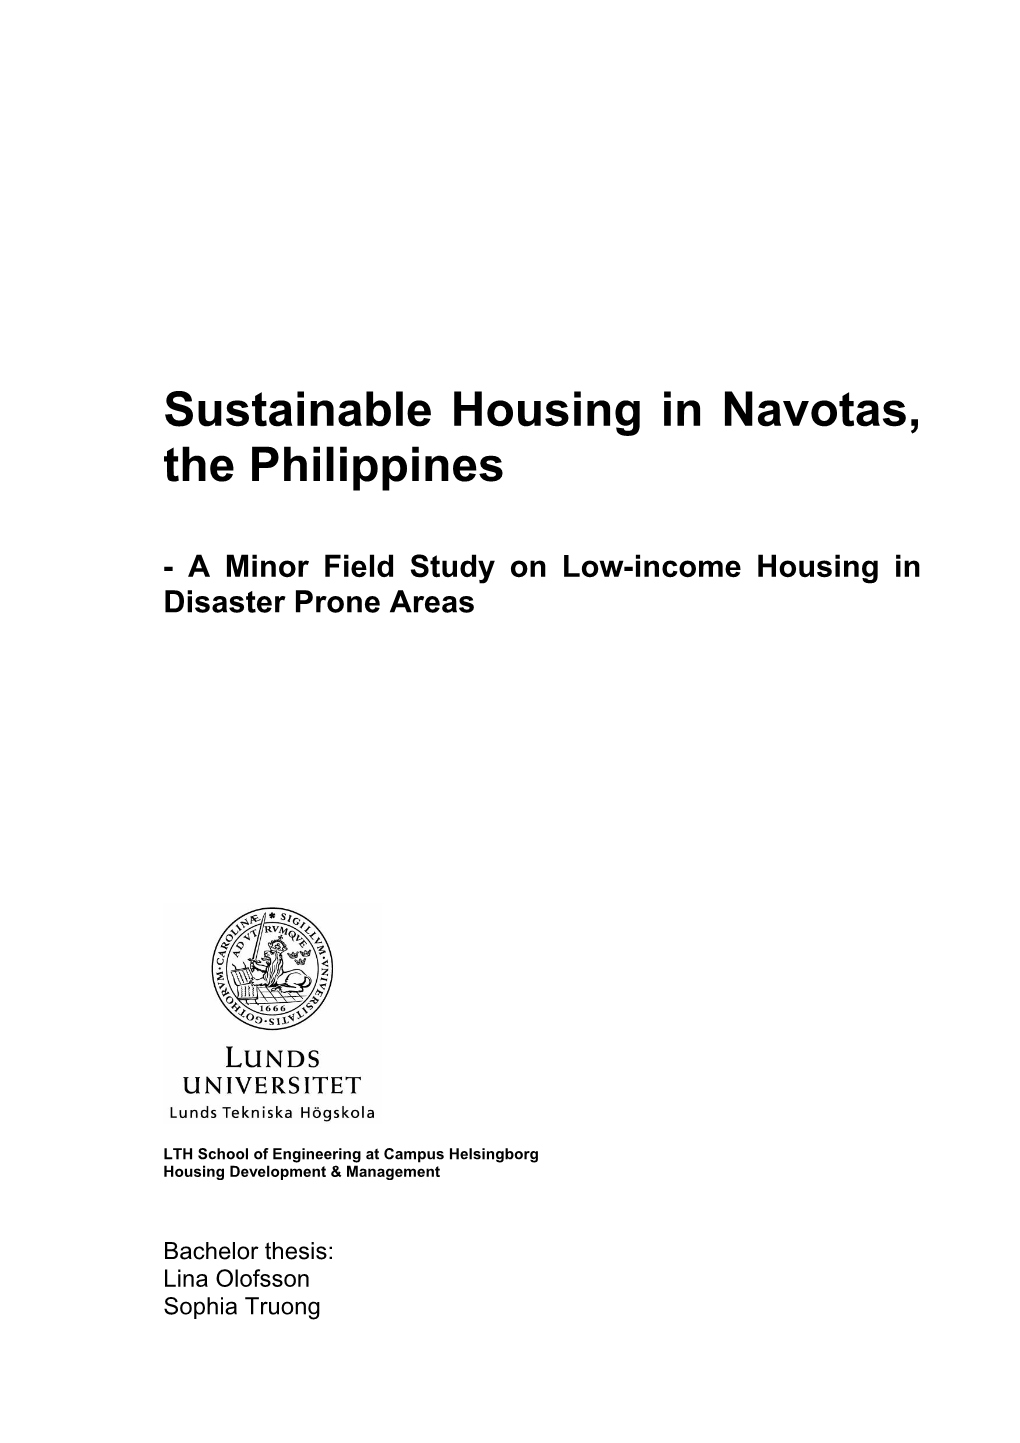 Sustainable Housing in Navotas, the Philippines